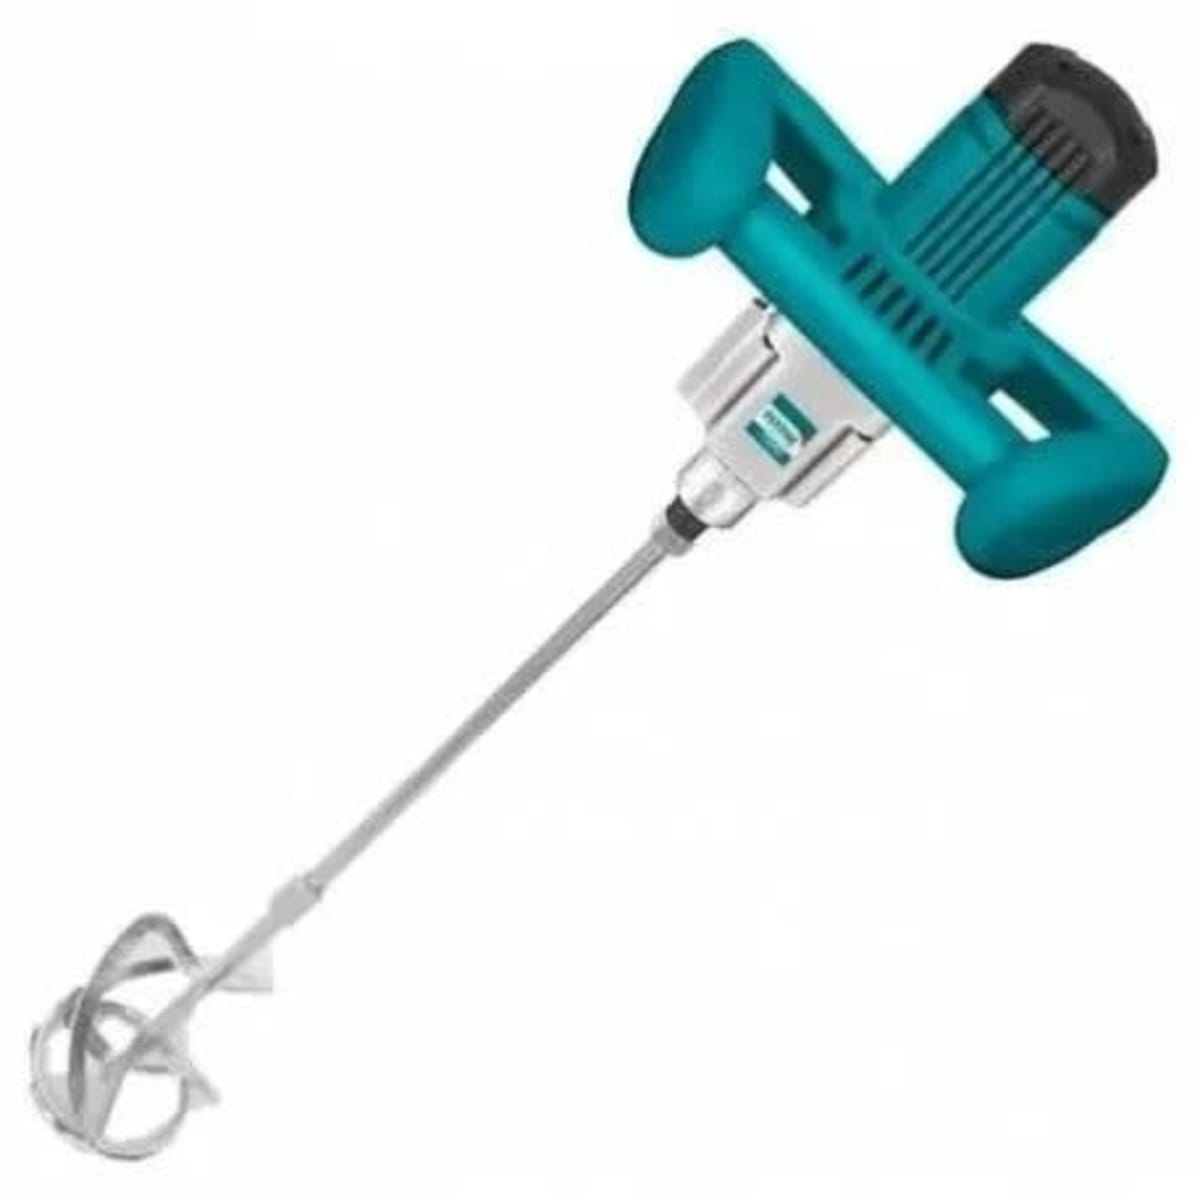 Total Electric Paint Mixer 1400watts